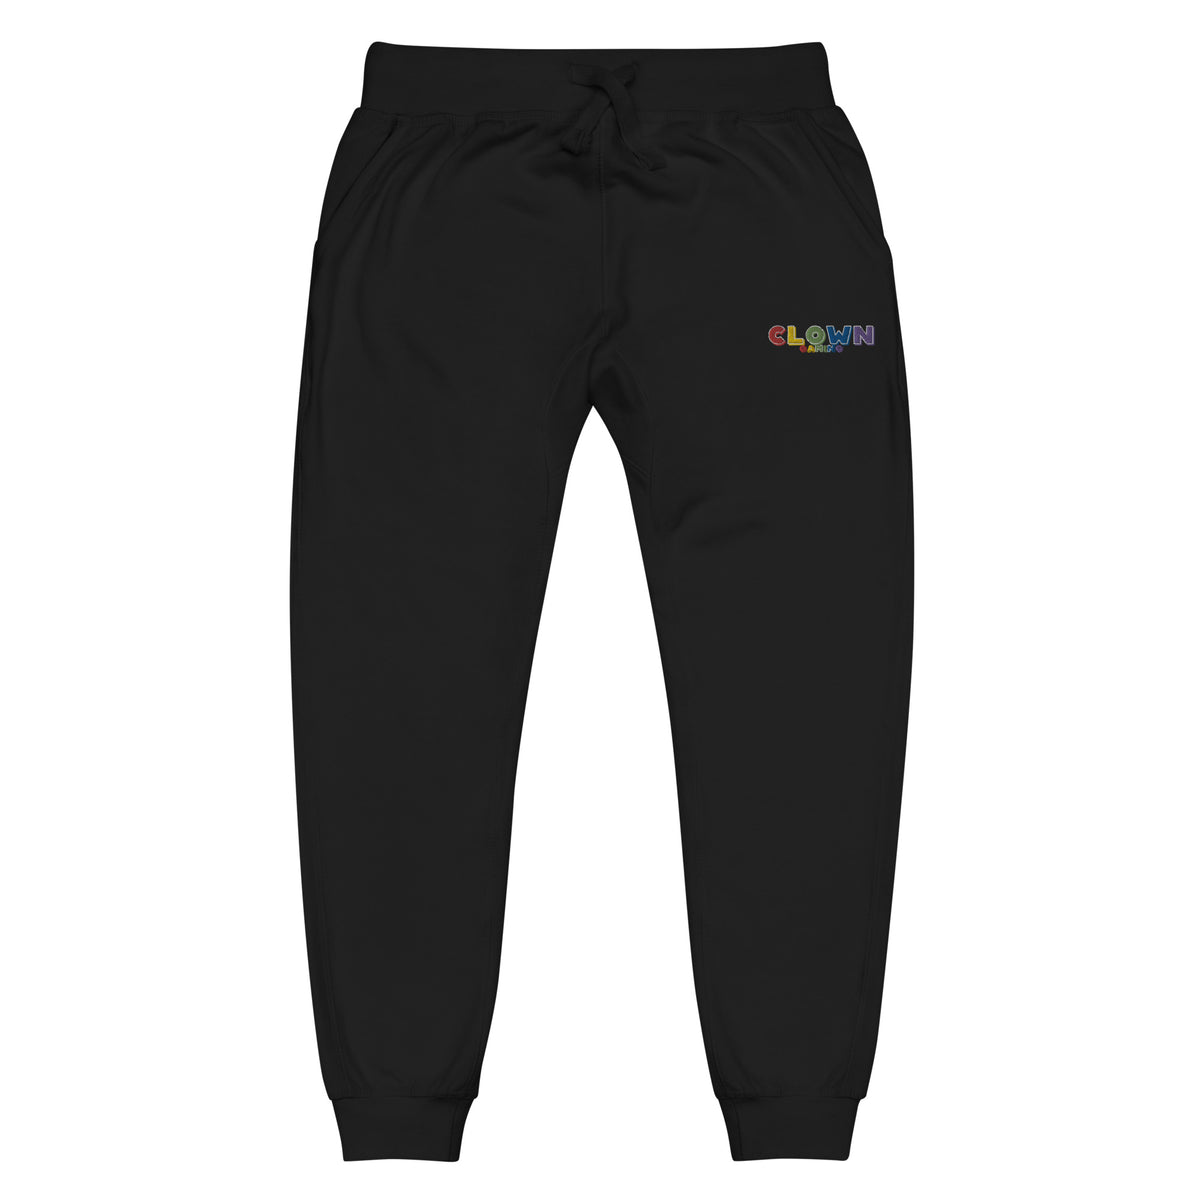 Clown Gaming | On Demand | Embroidered Unisex Fleece Sweatpants